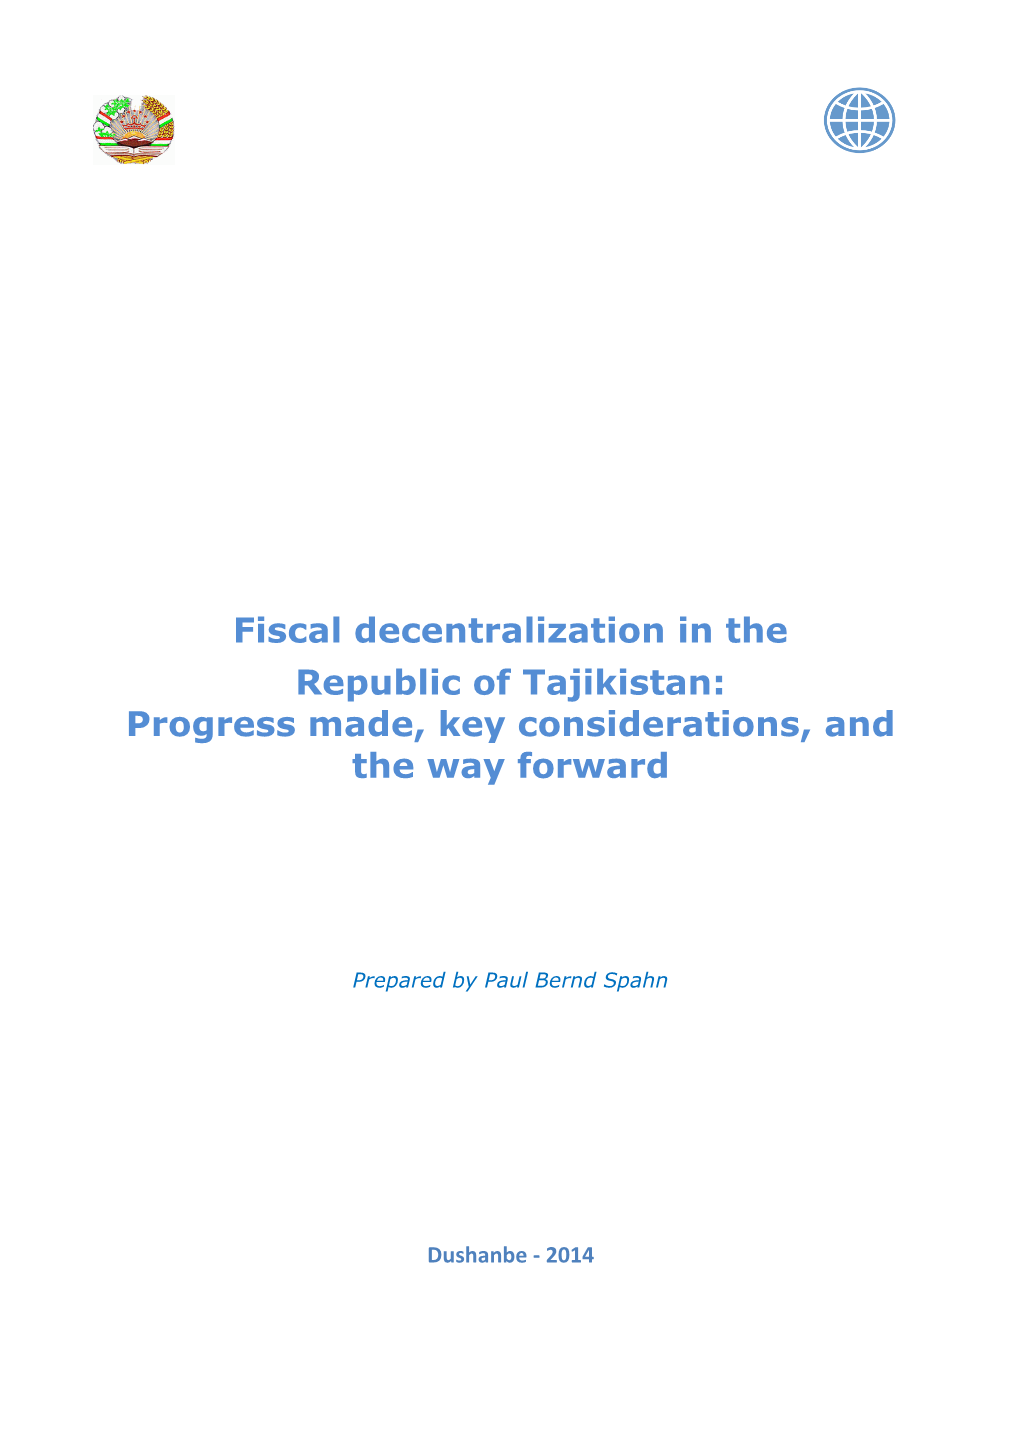 Fiscal Decentralization in the Republic of Tajikistan: Progress Made, Key Considerations, and the Way Forward